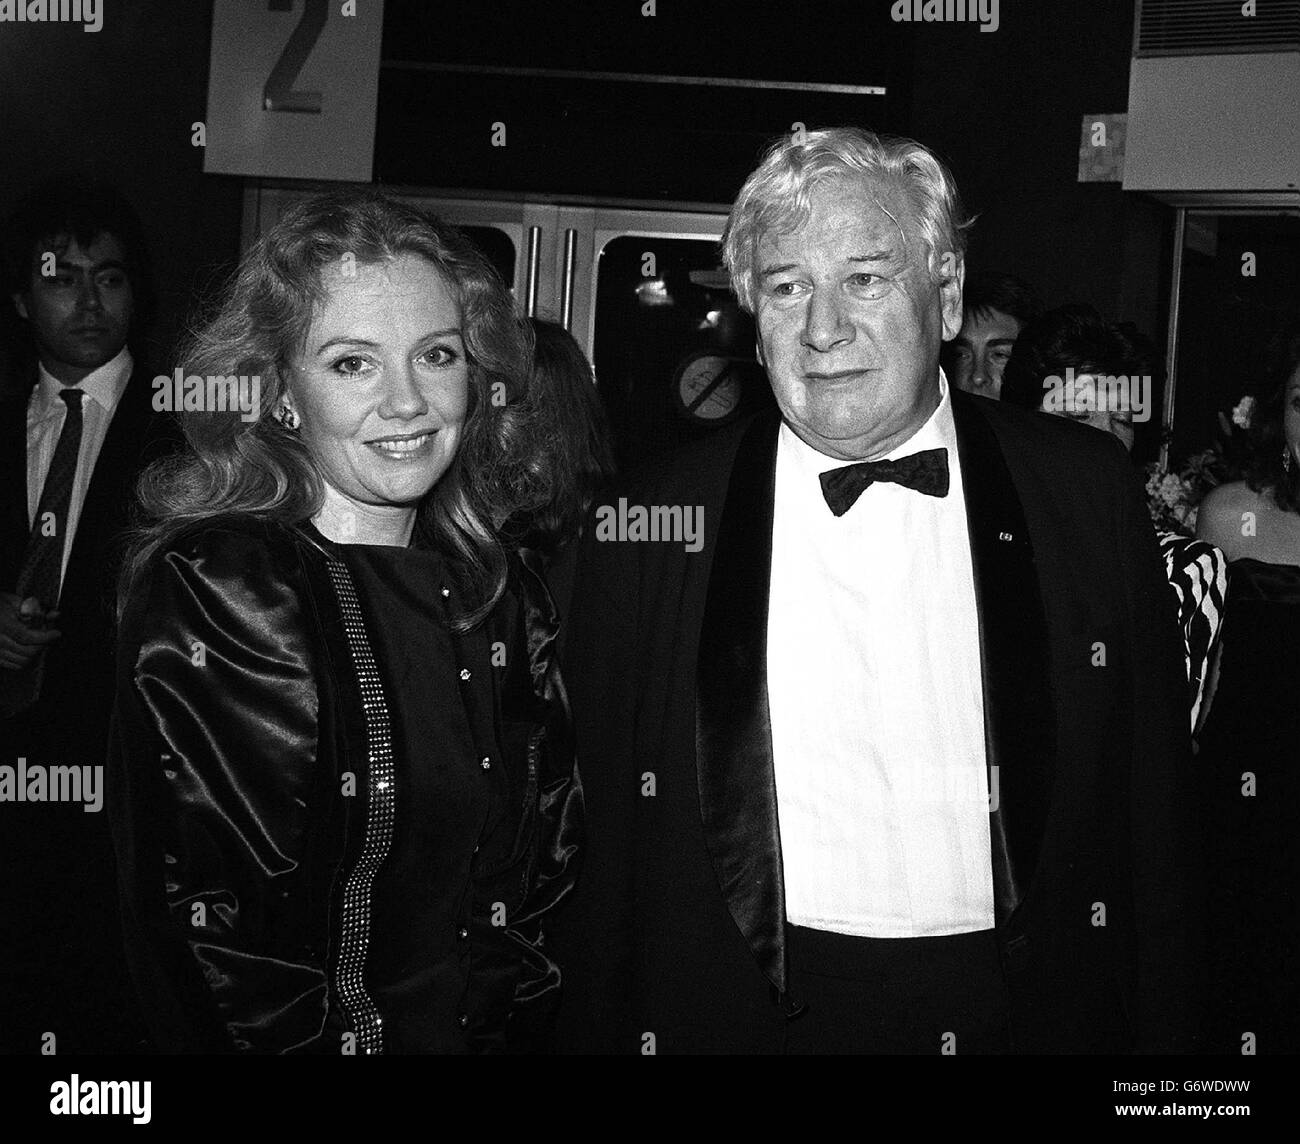 British actor Peter Ustinov and Hayley Mills at London's Cannon Cinema, for the Royal Charity Premiere of Michael Winner's new film 'Appointment with Death'. Prince Edward attended the first screening of the Agatha Christie whodunnit, in which Ustinov plays detective Hercule Poirot. Stock Photo